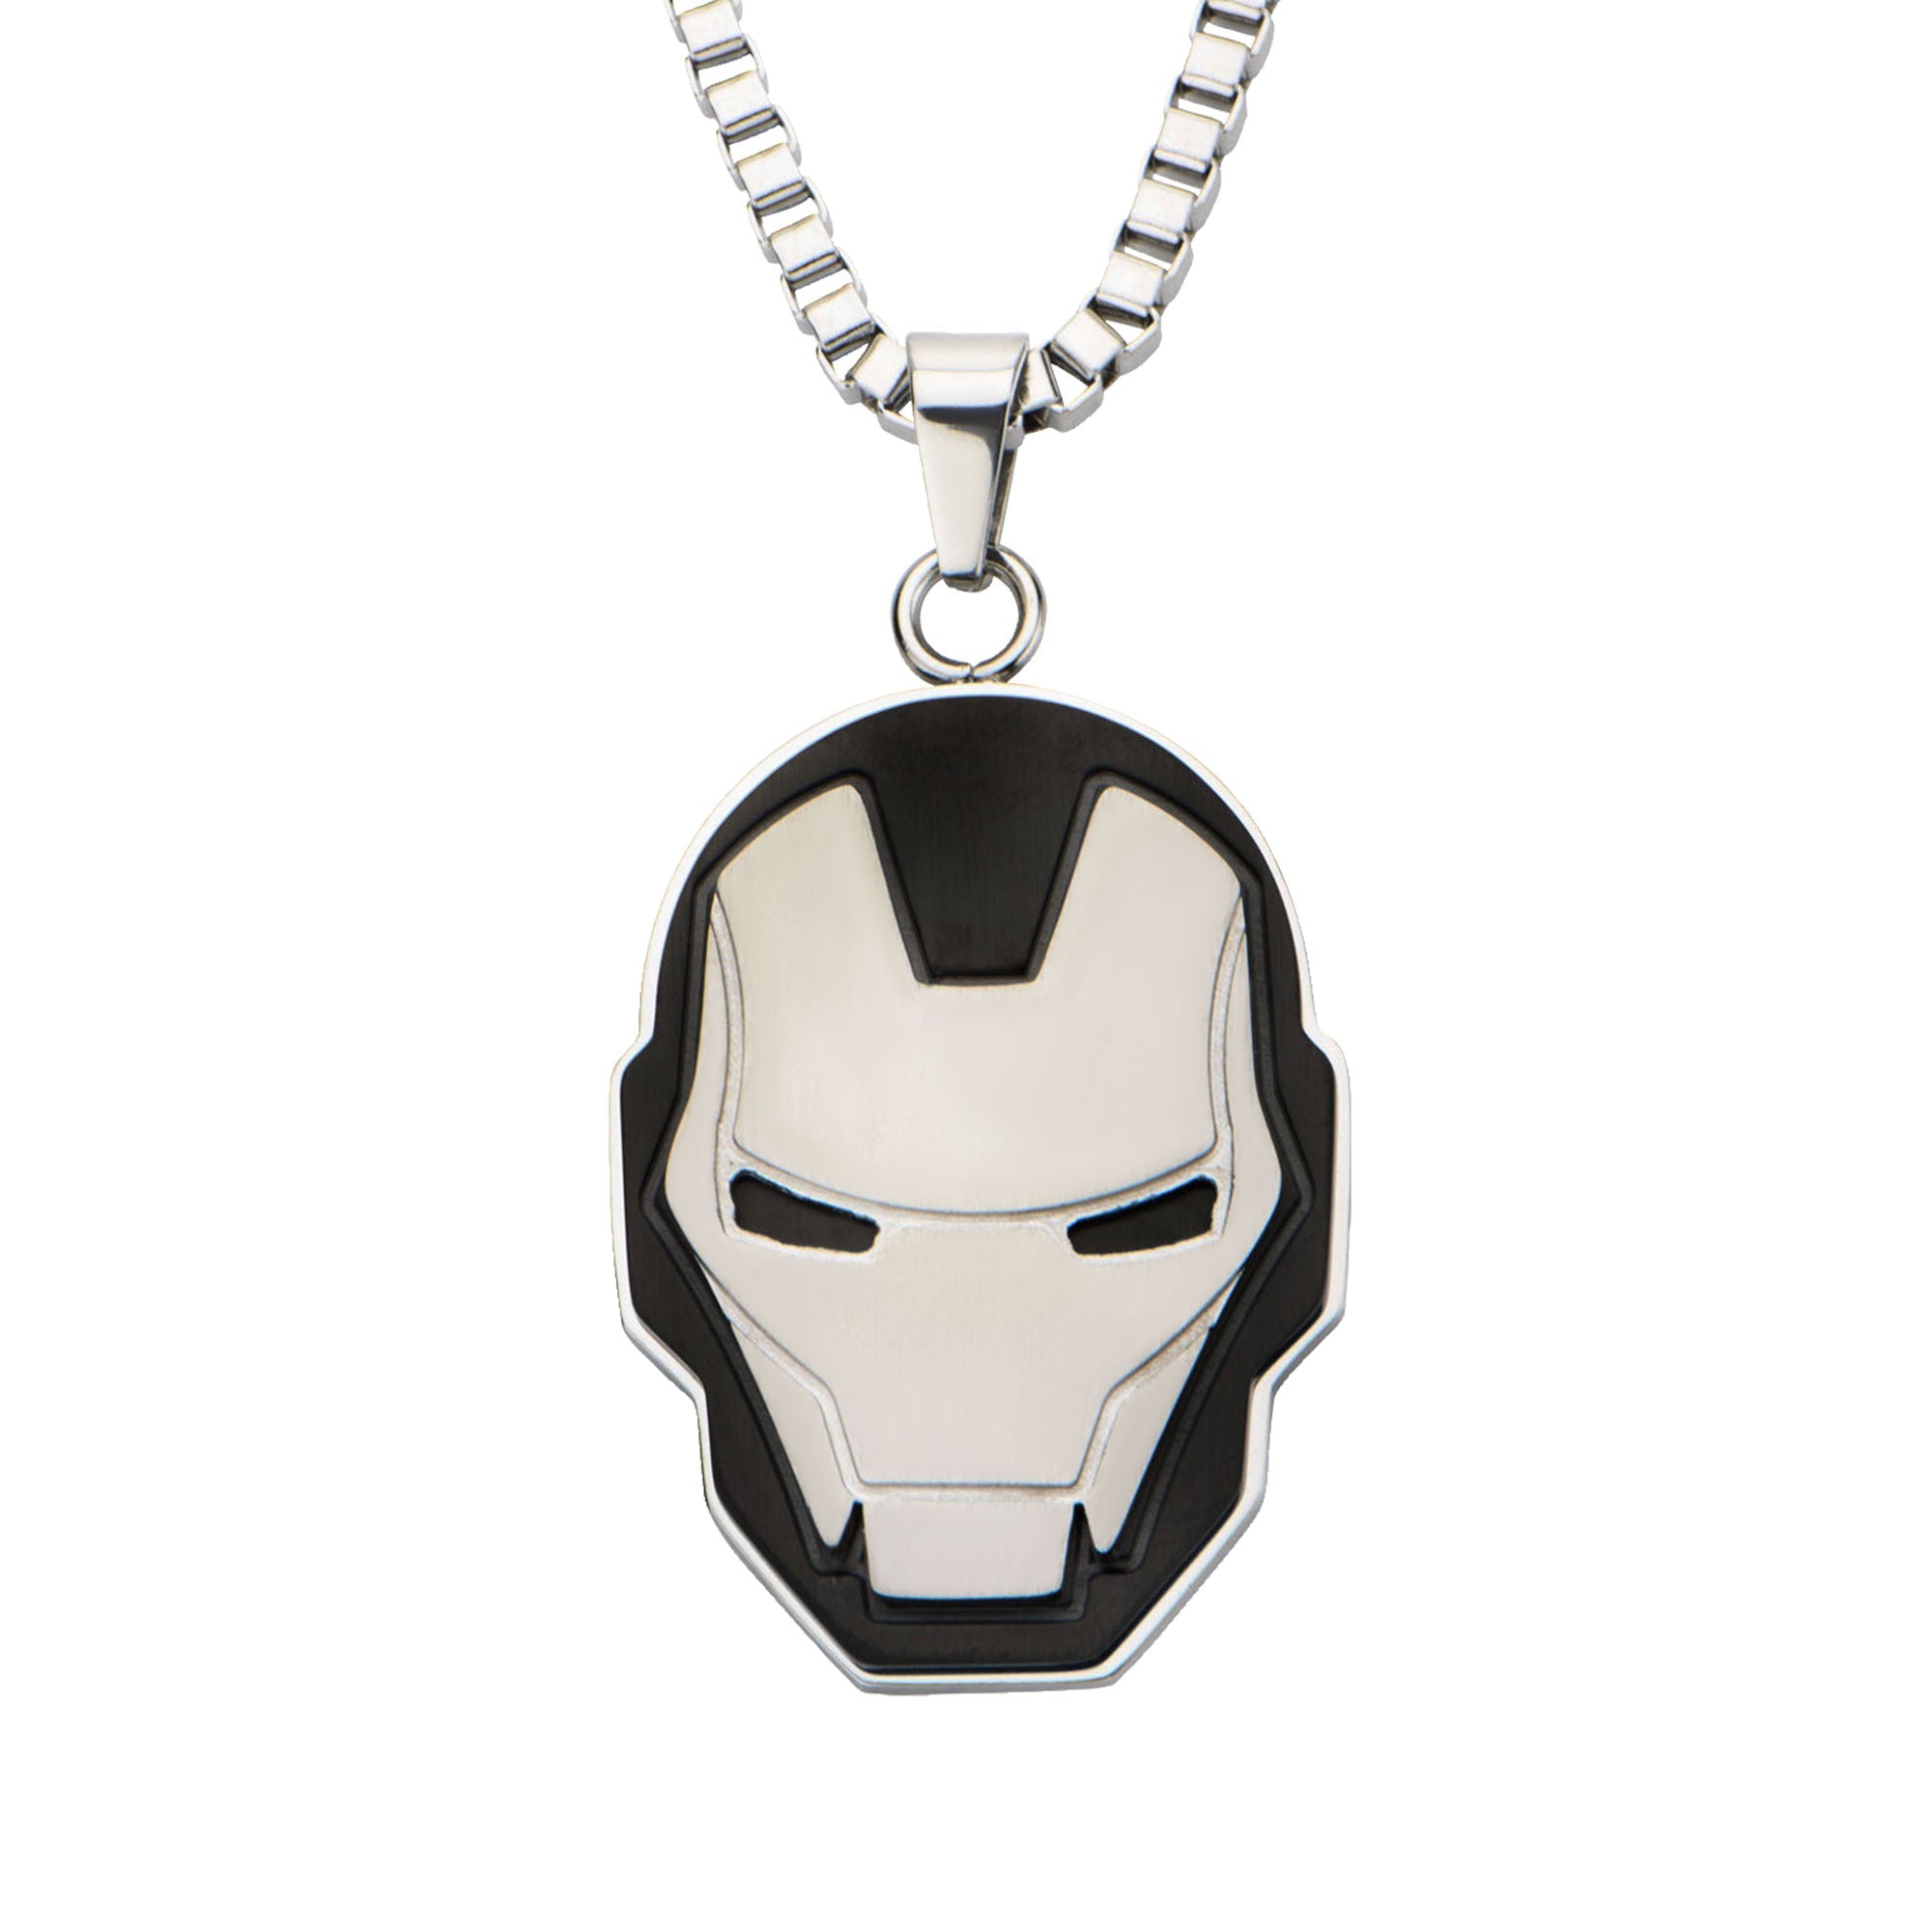 Marvel Iron Man Pendant Necklace [COMING SOON]